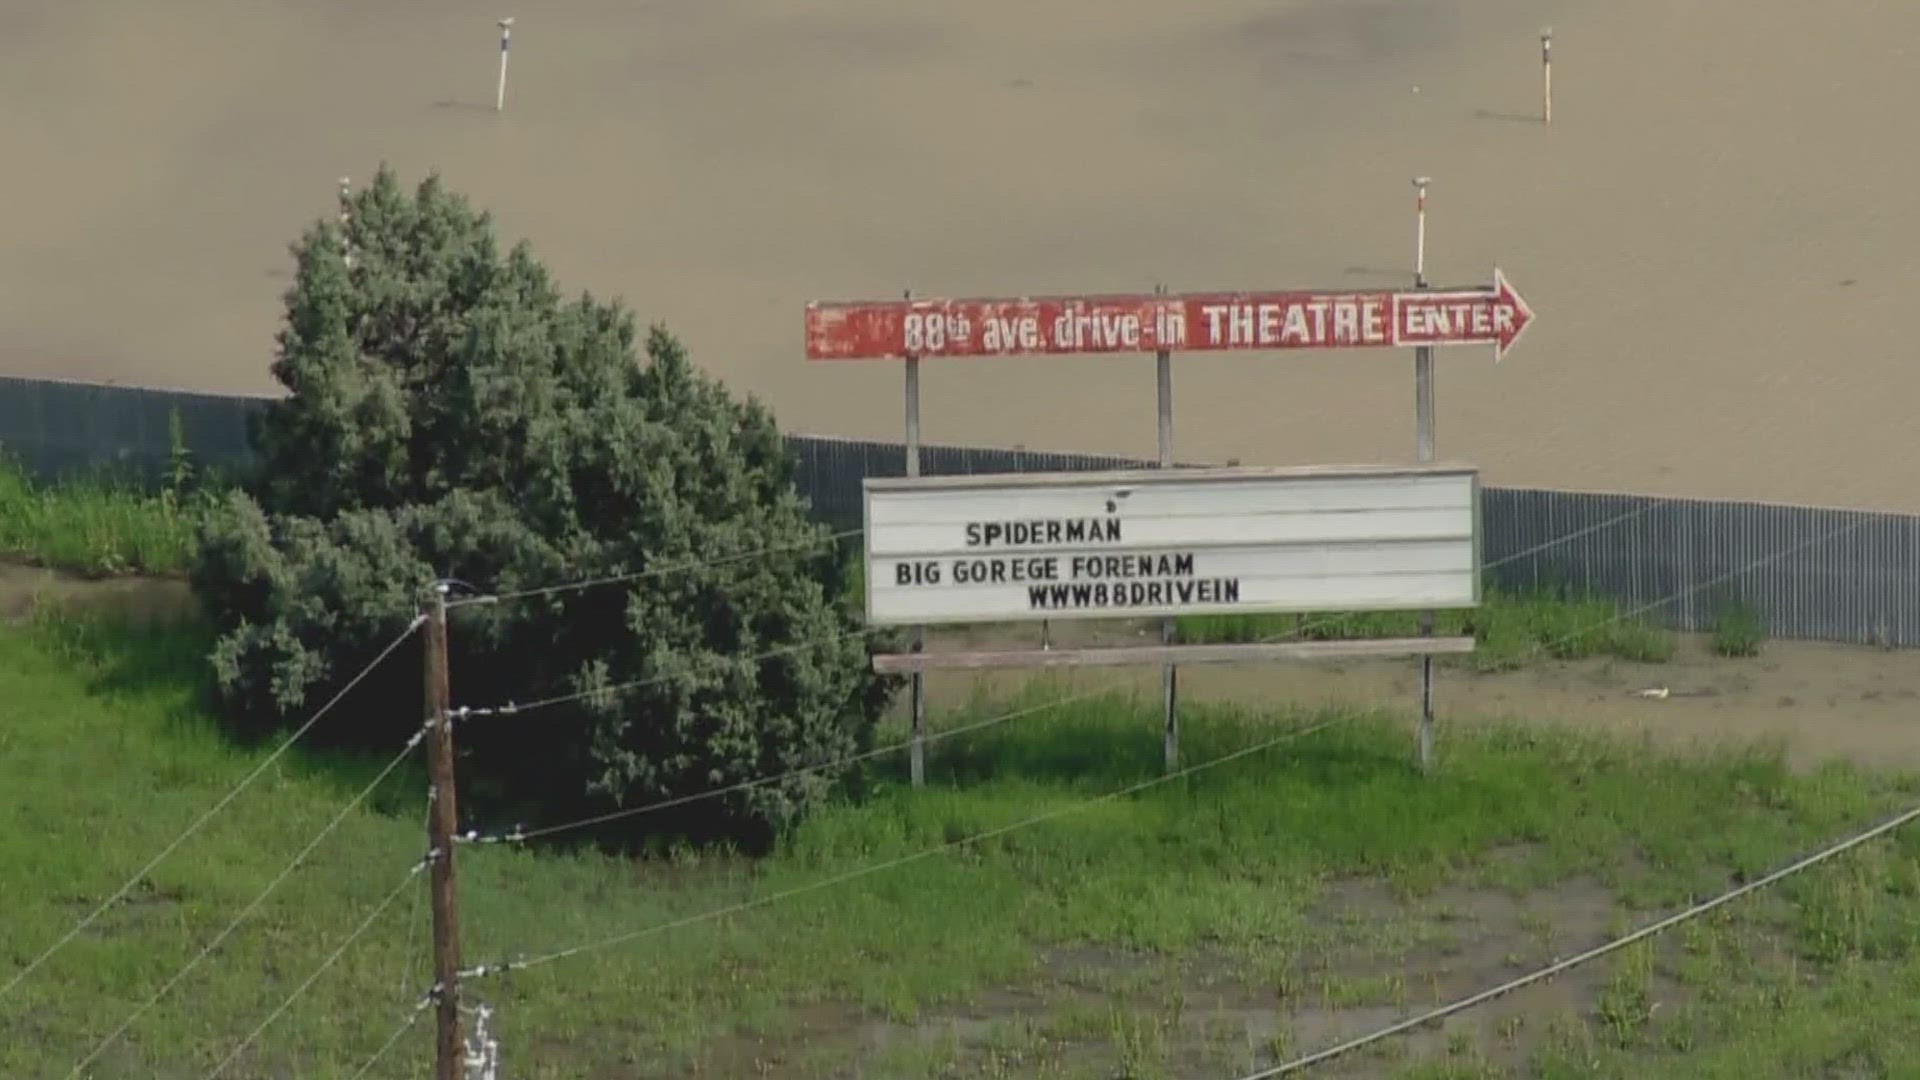 The 88 Drive-In movie theater is closing after a decades-long run, and the city council is considering a request to rezone the property to accommodate a warehouse.